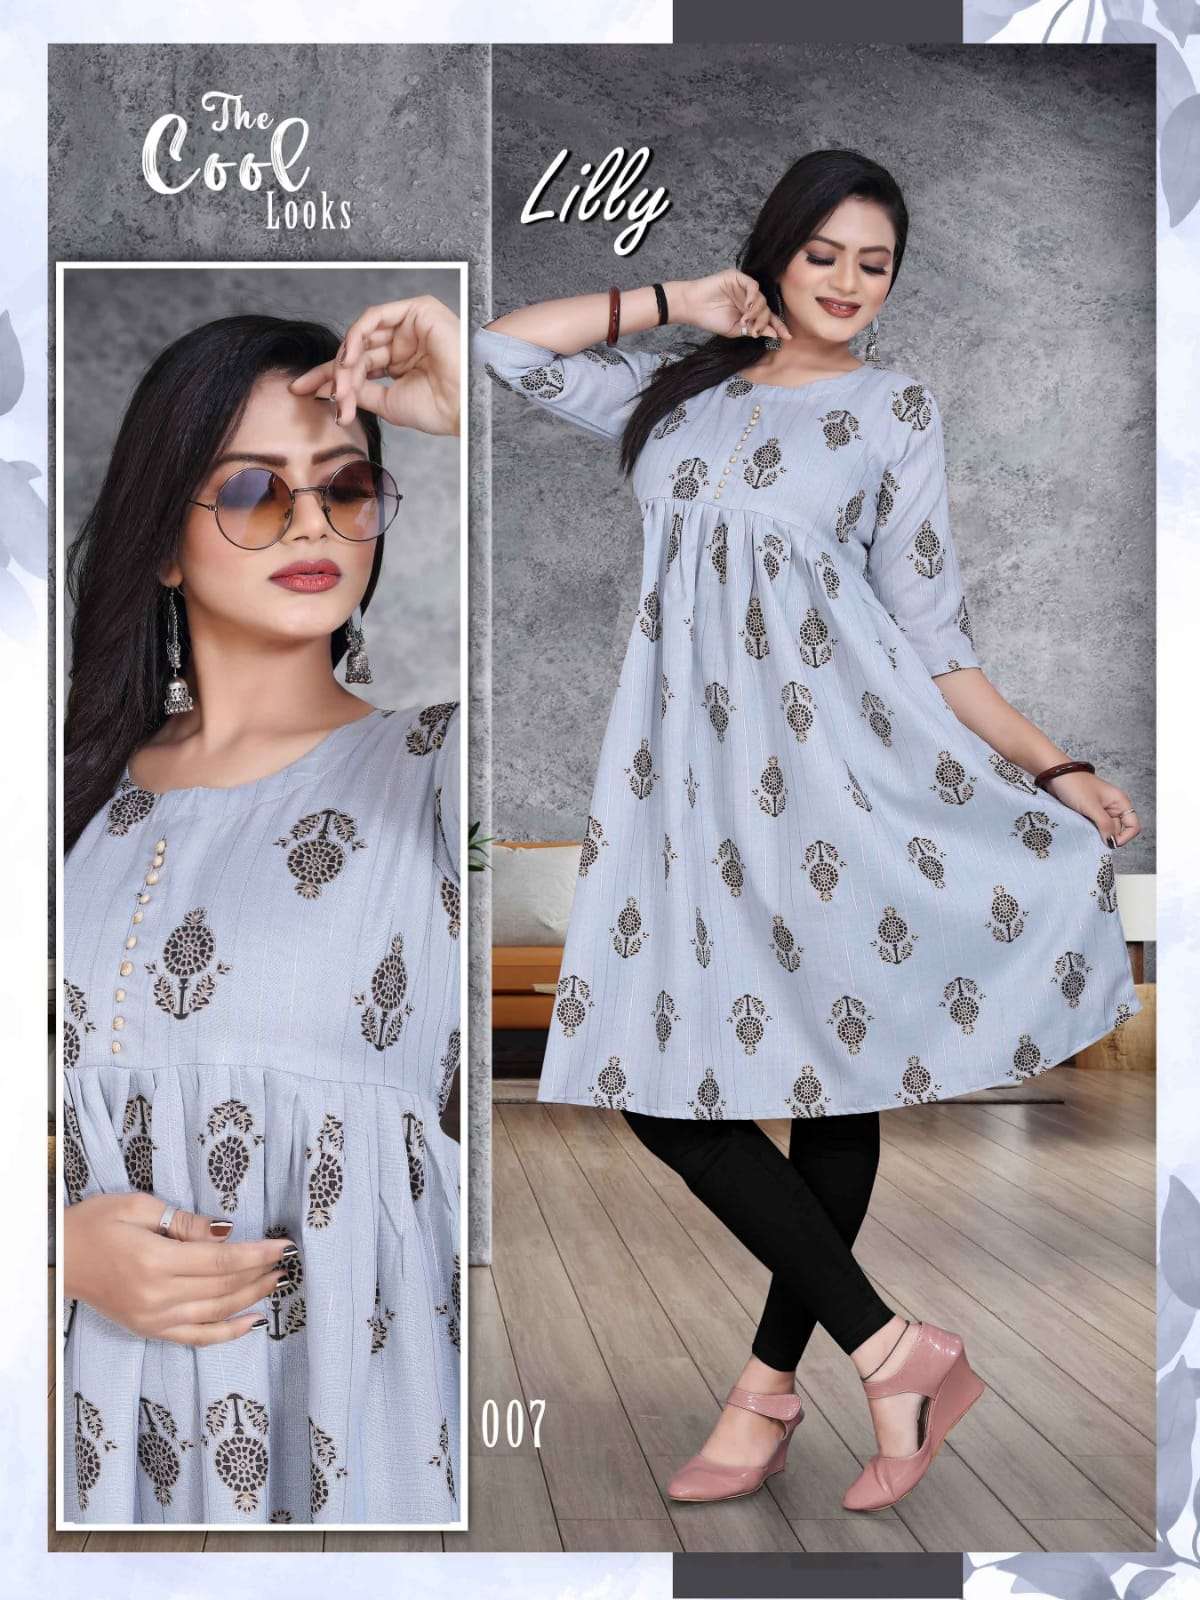 Gaabha Lilly Fancy With Printed Kurti collection